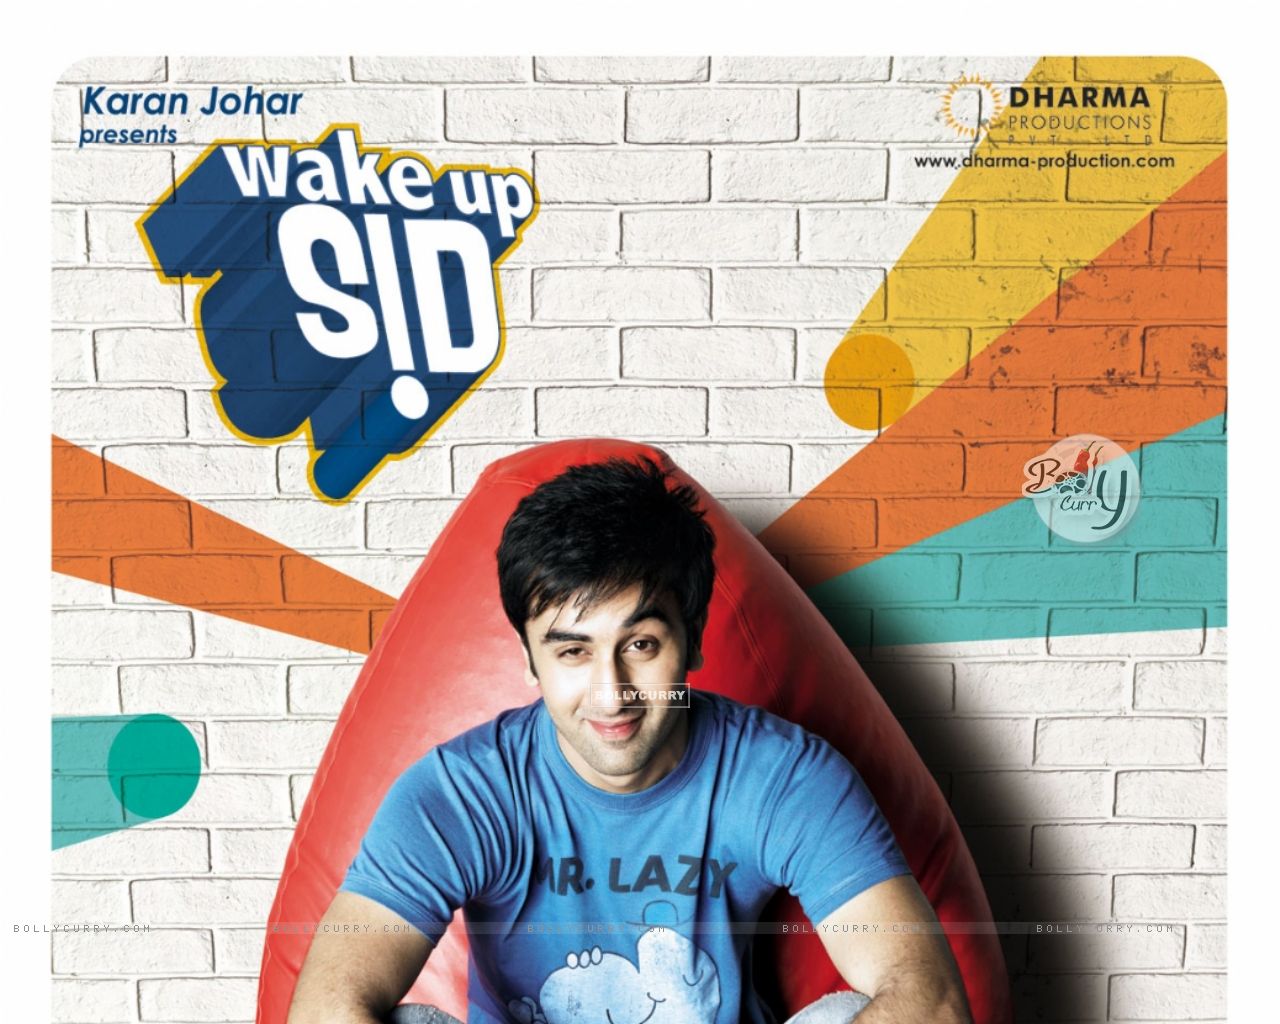 Wallpaper - Poster of Wake up Sid movie with Ranbir Kapoor (38232)  size:1280x1024